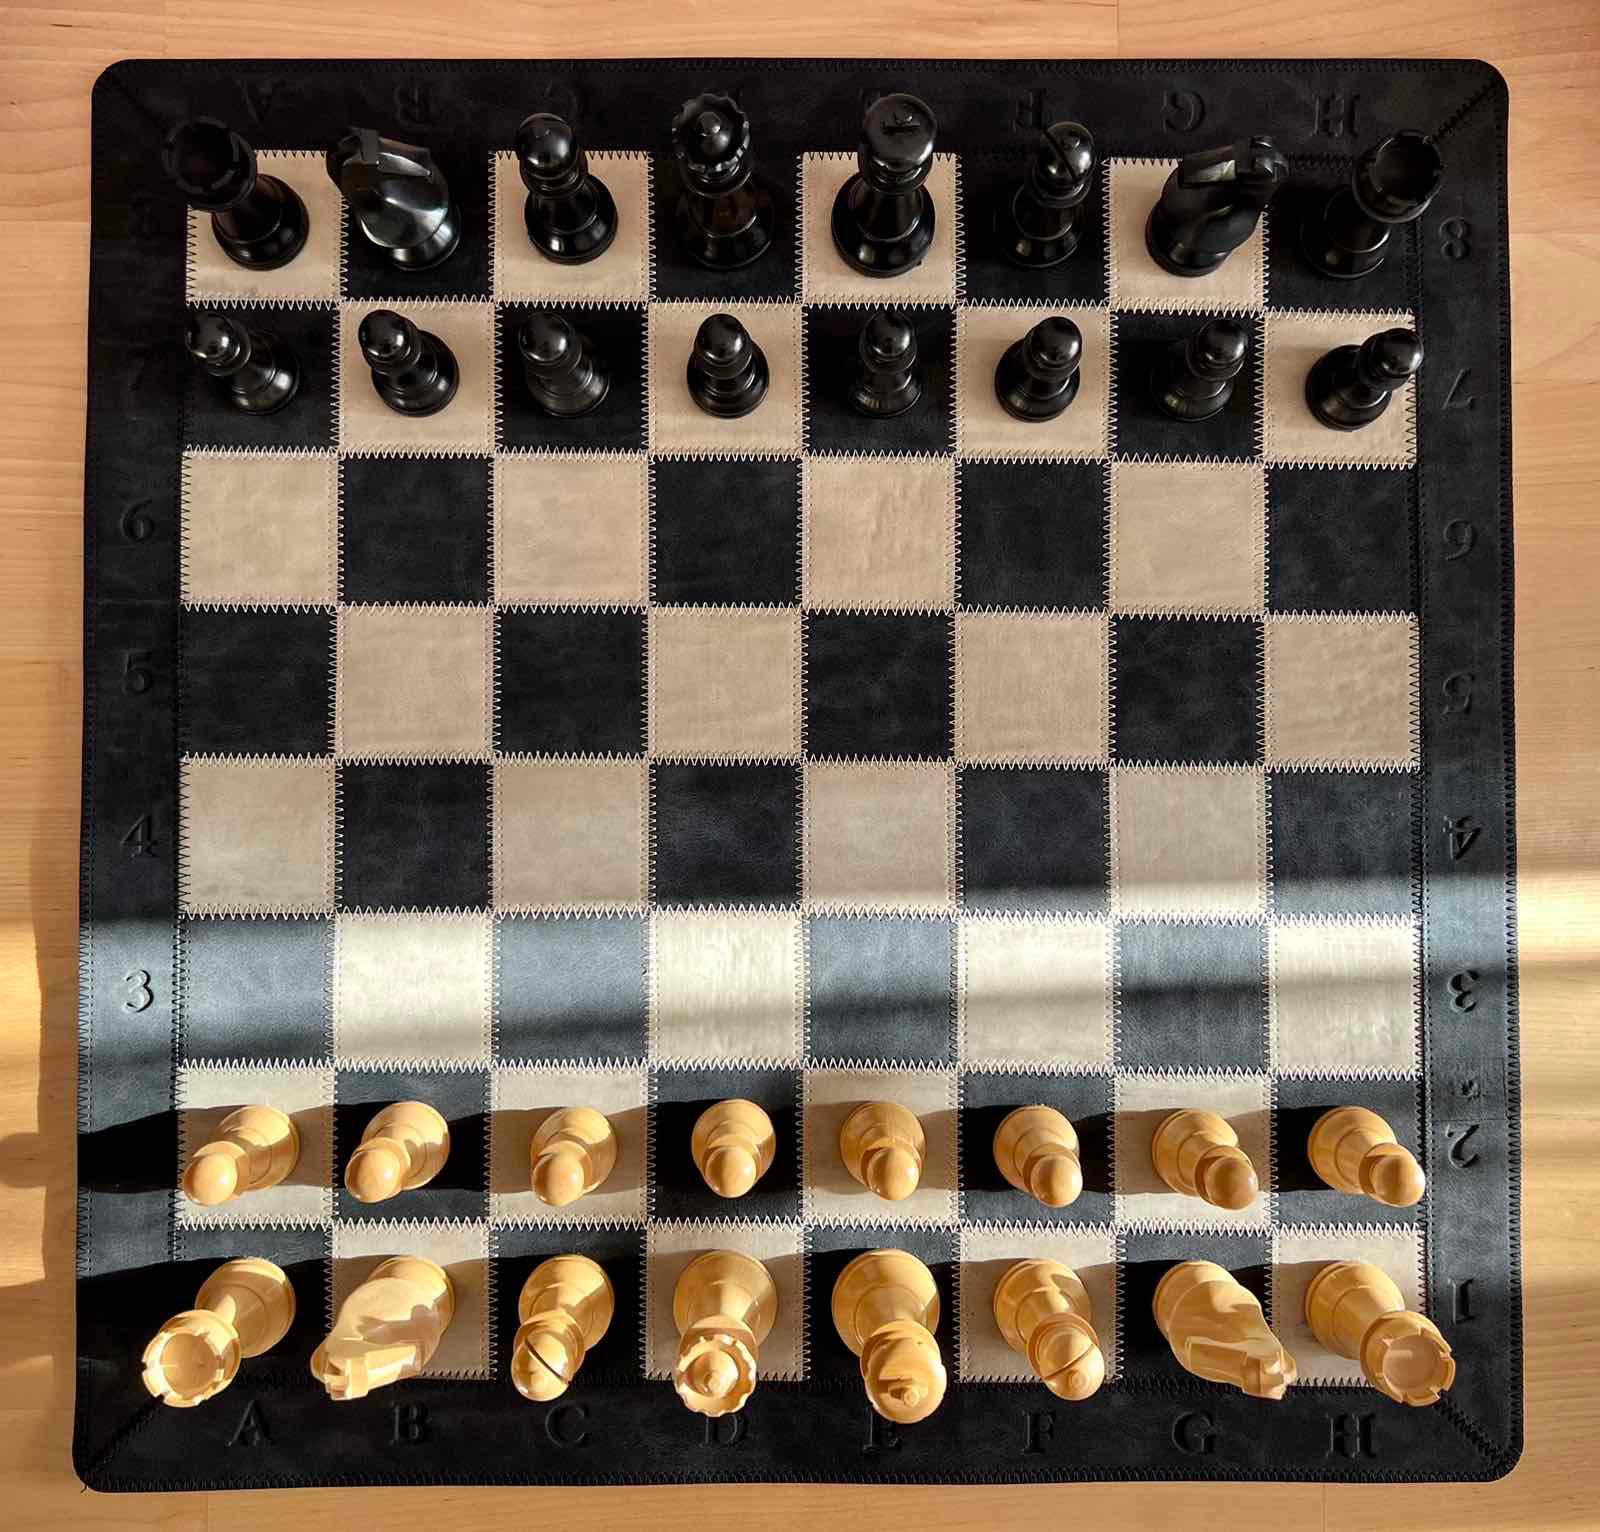 Official FIDE World Championship Chess Set - ChessBaron Chess Sets Canada -  Call (213) 325 6540